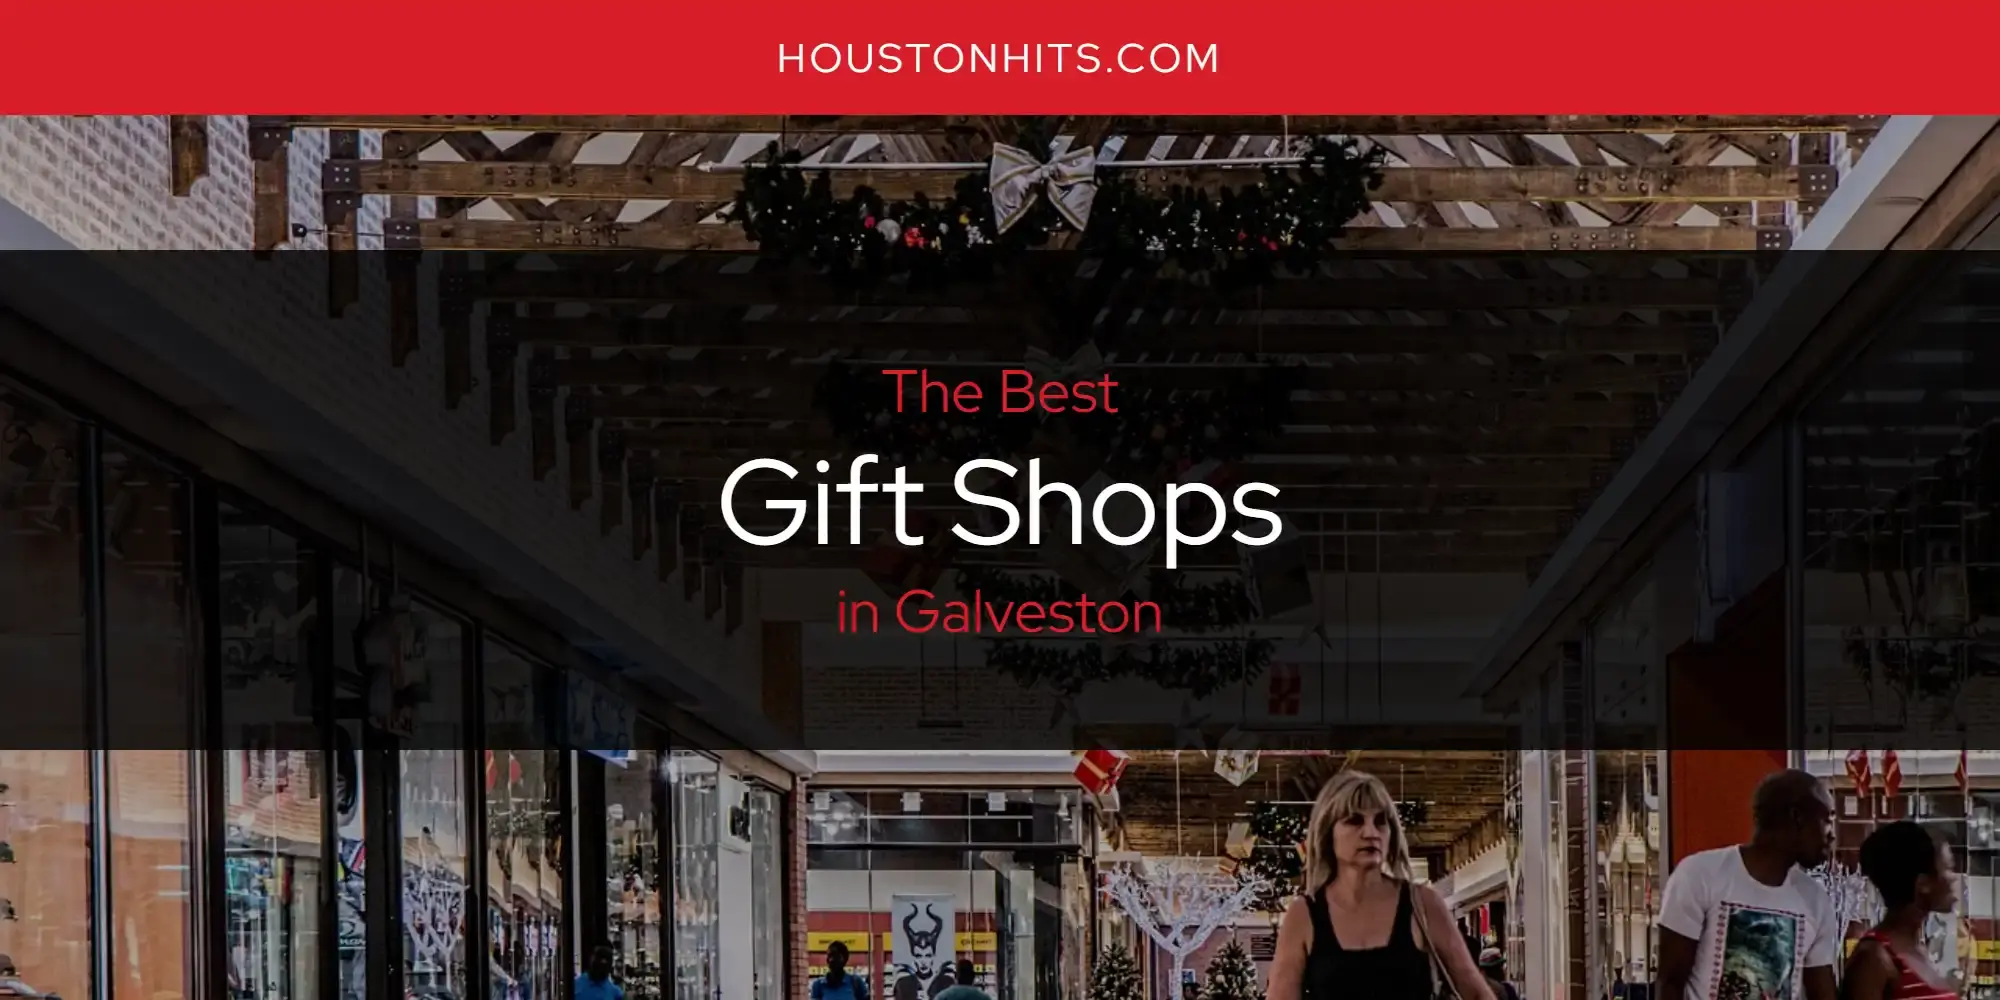 Best Gift Shops in Galveston? Here's the Top 17